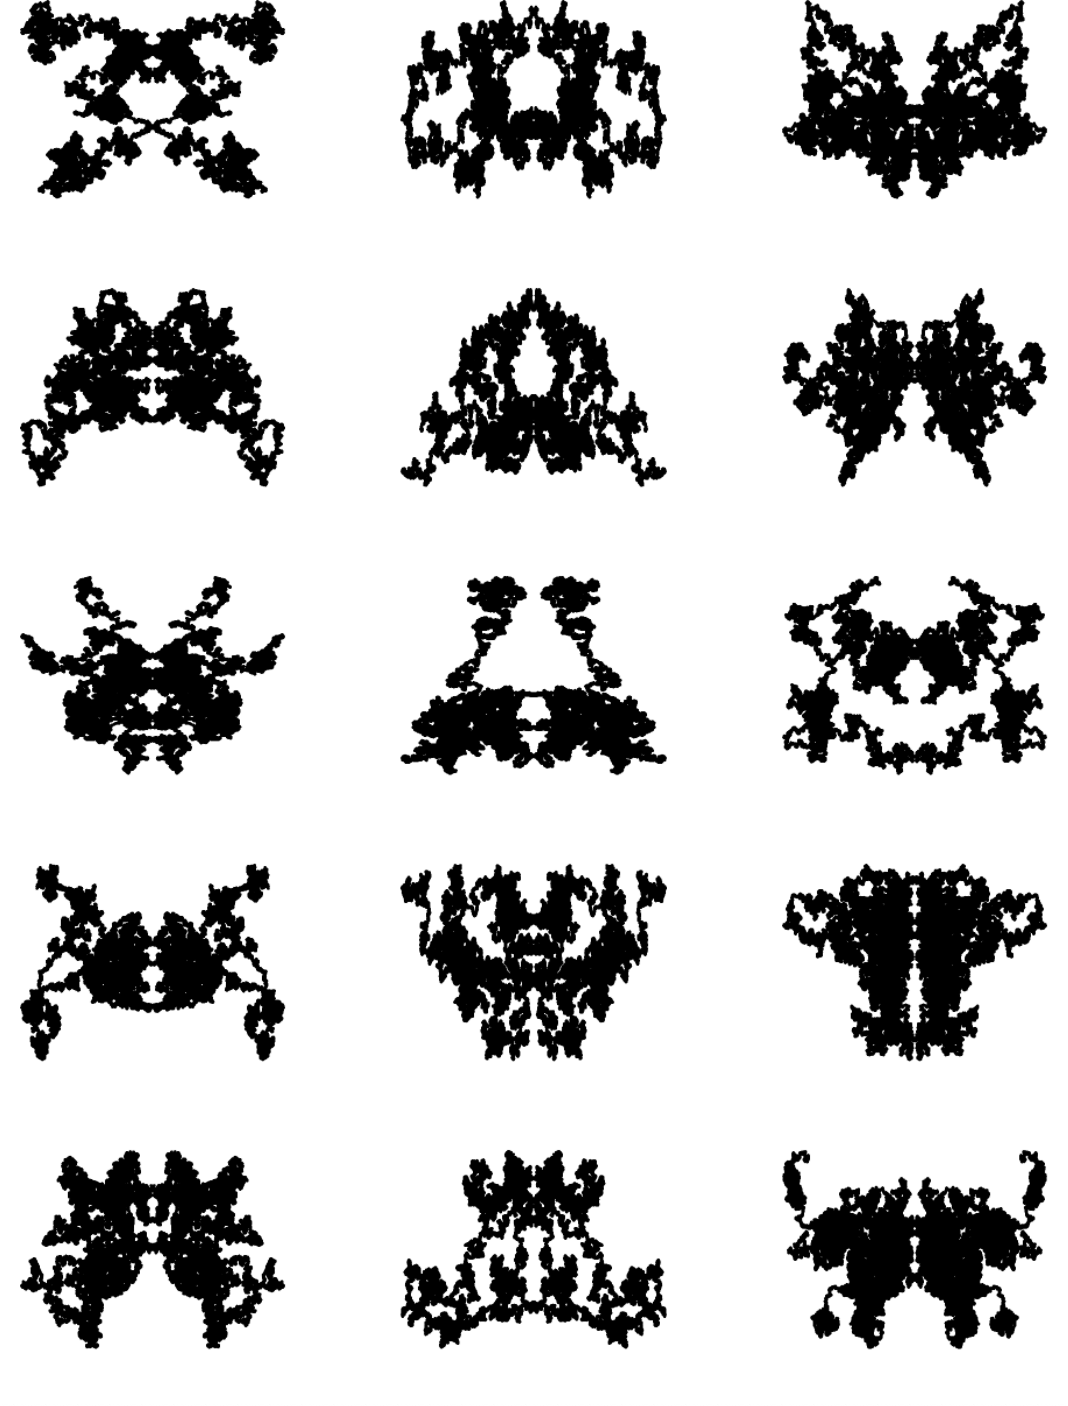 Rorschachs have been ruined by gaming Blank Meme Template